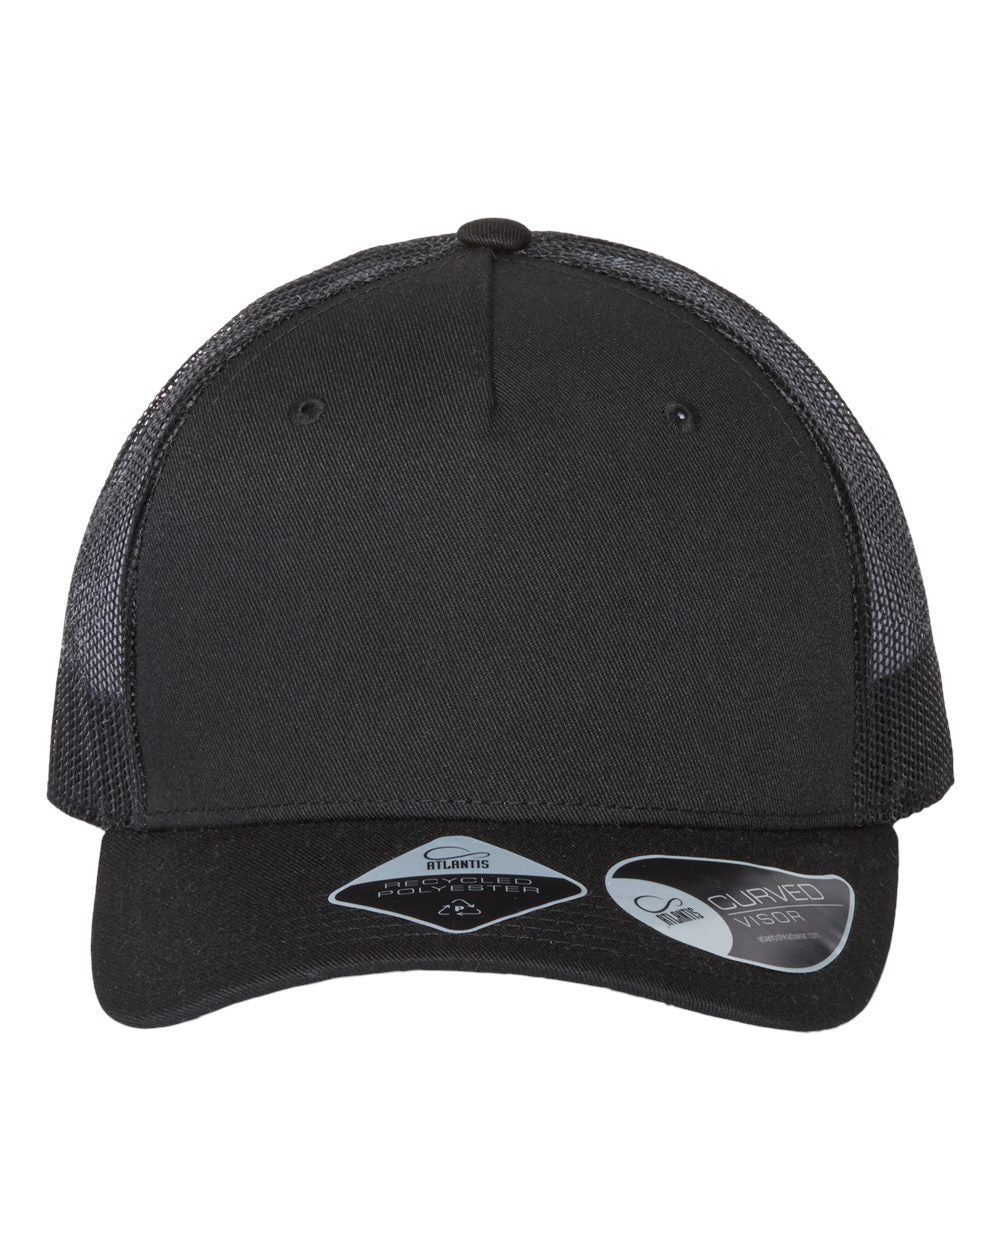 Customizable recycled polyester Atlantis truck hat in black